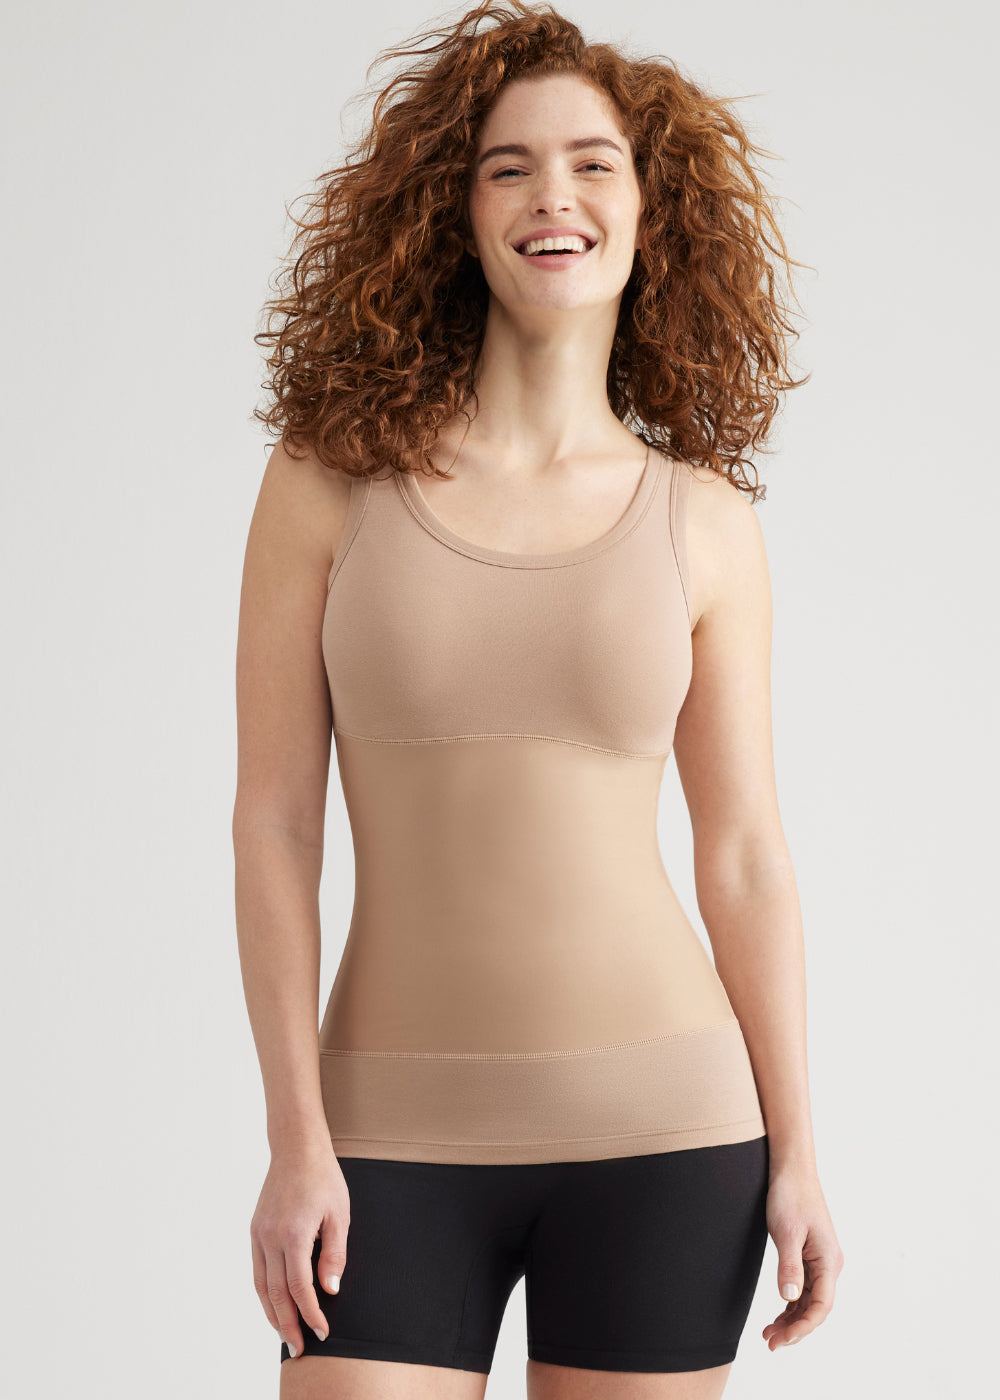 boyfriend yummie tummie® 3-panel shaping tank in Almond worn by a woman facing forward with arms at side Yummie